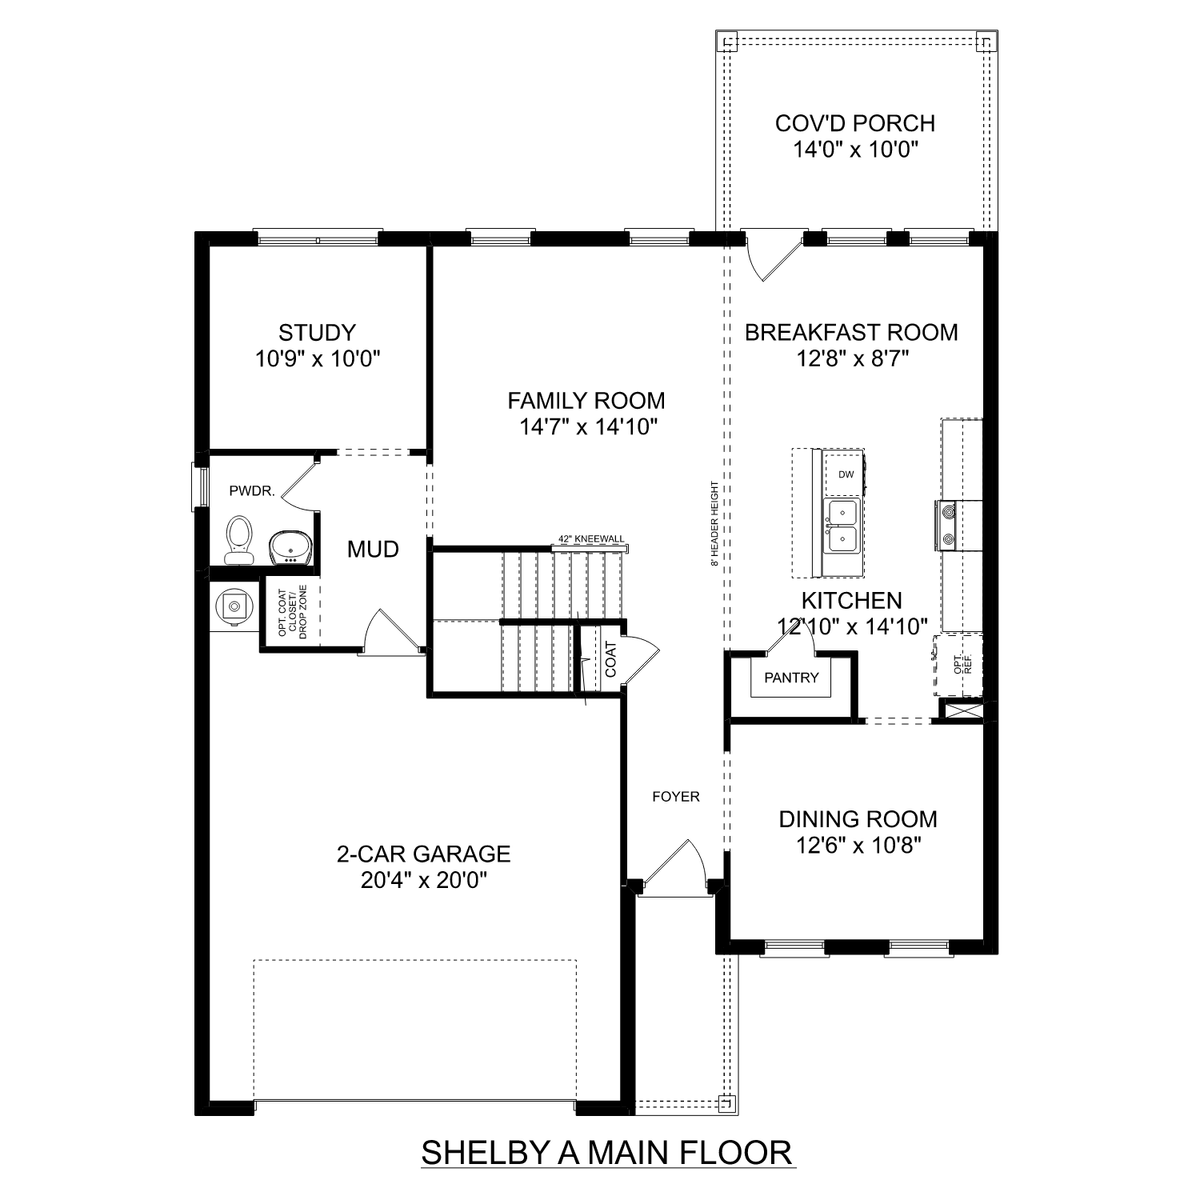 1 - The Shelby A buildable floor plan layout in Davidson Homes' Blue Spring community.